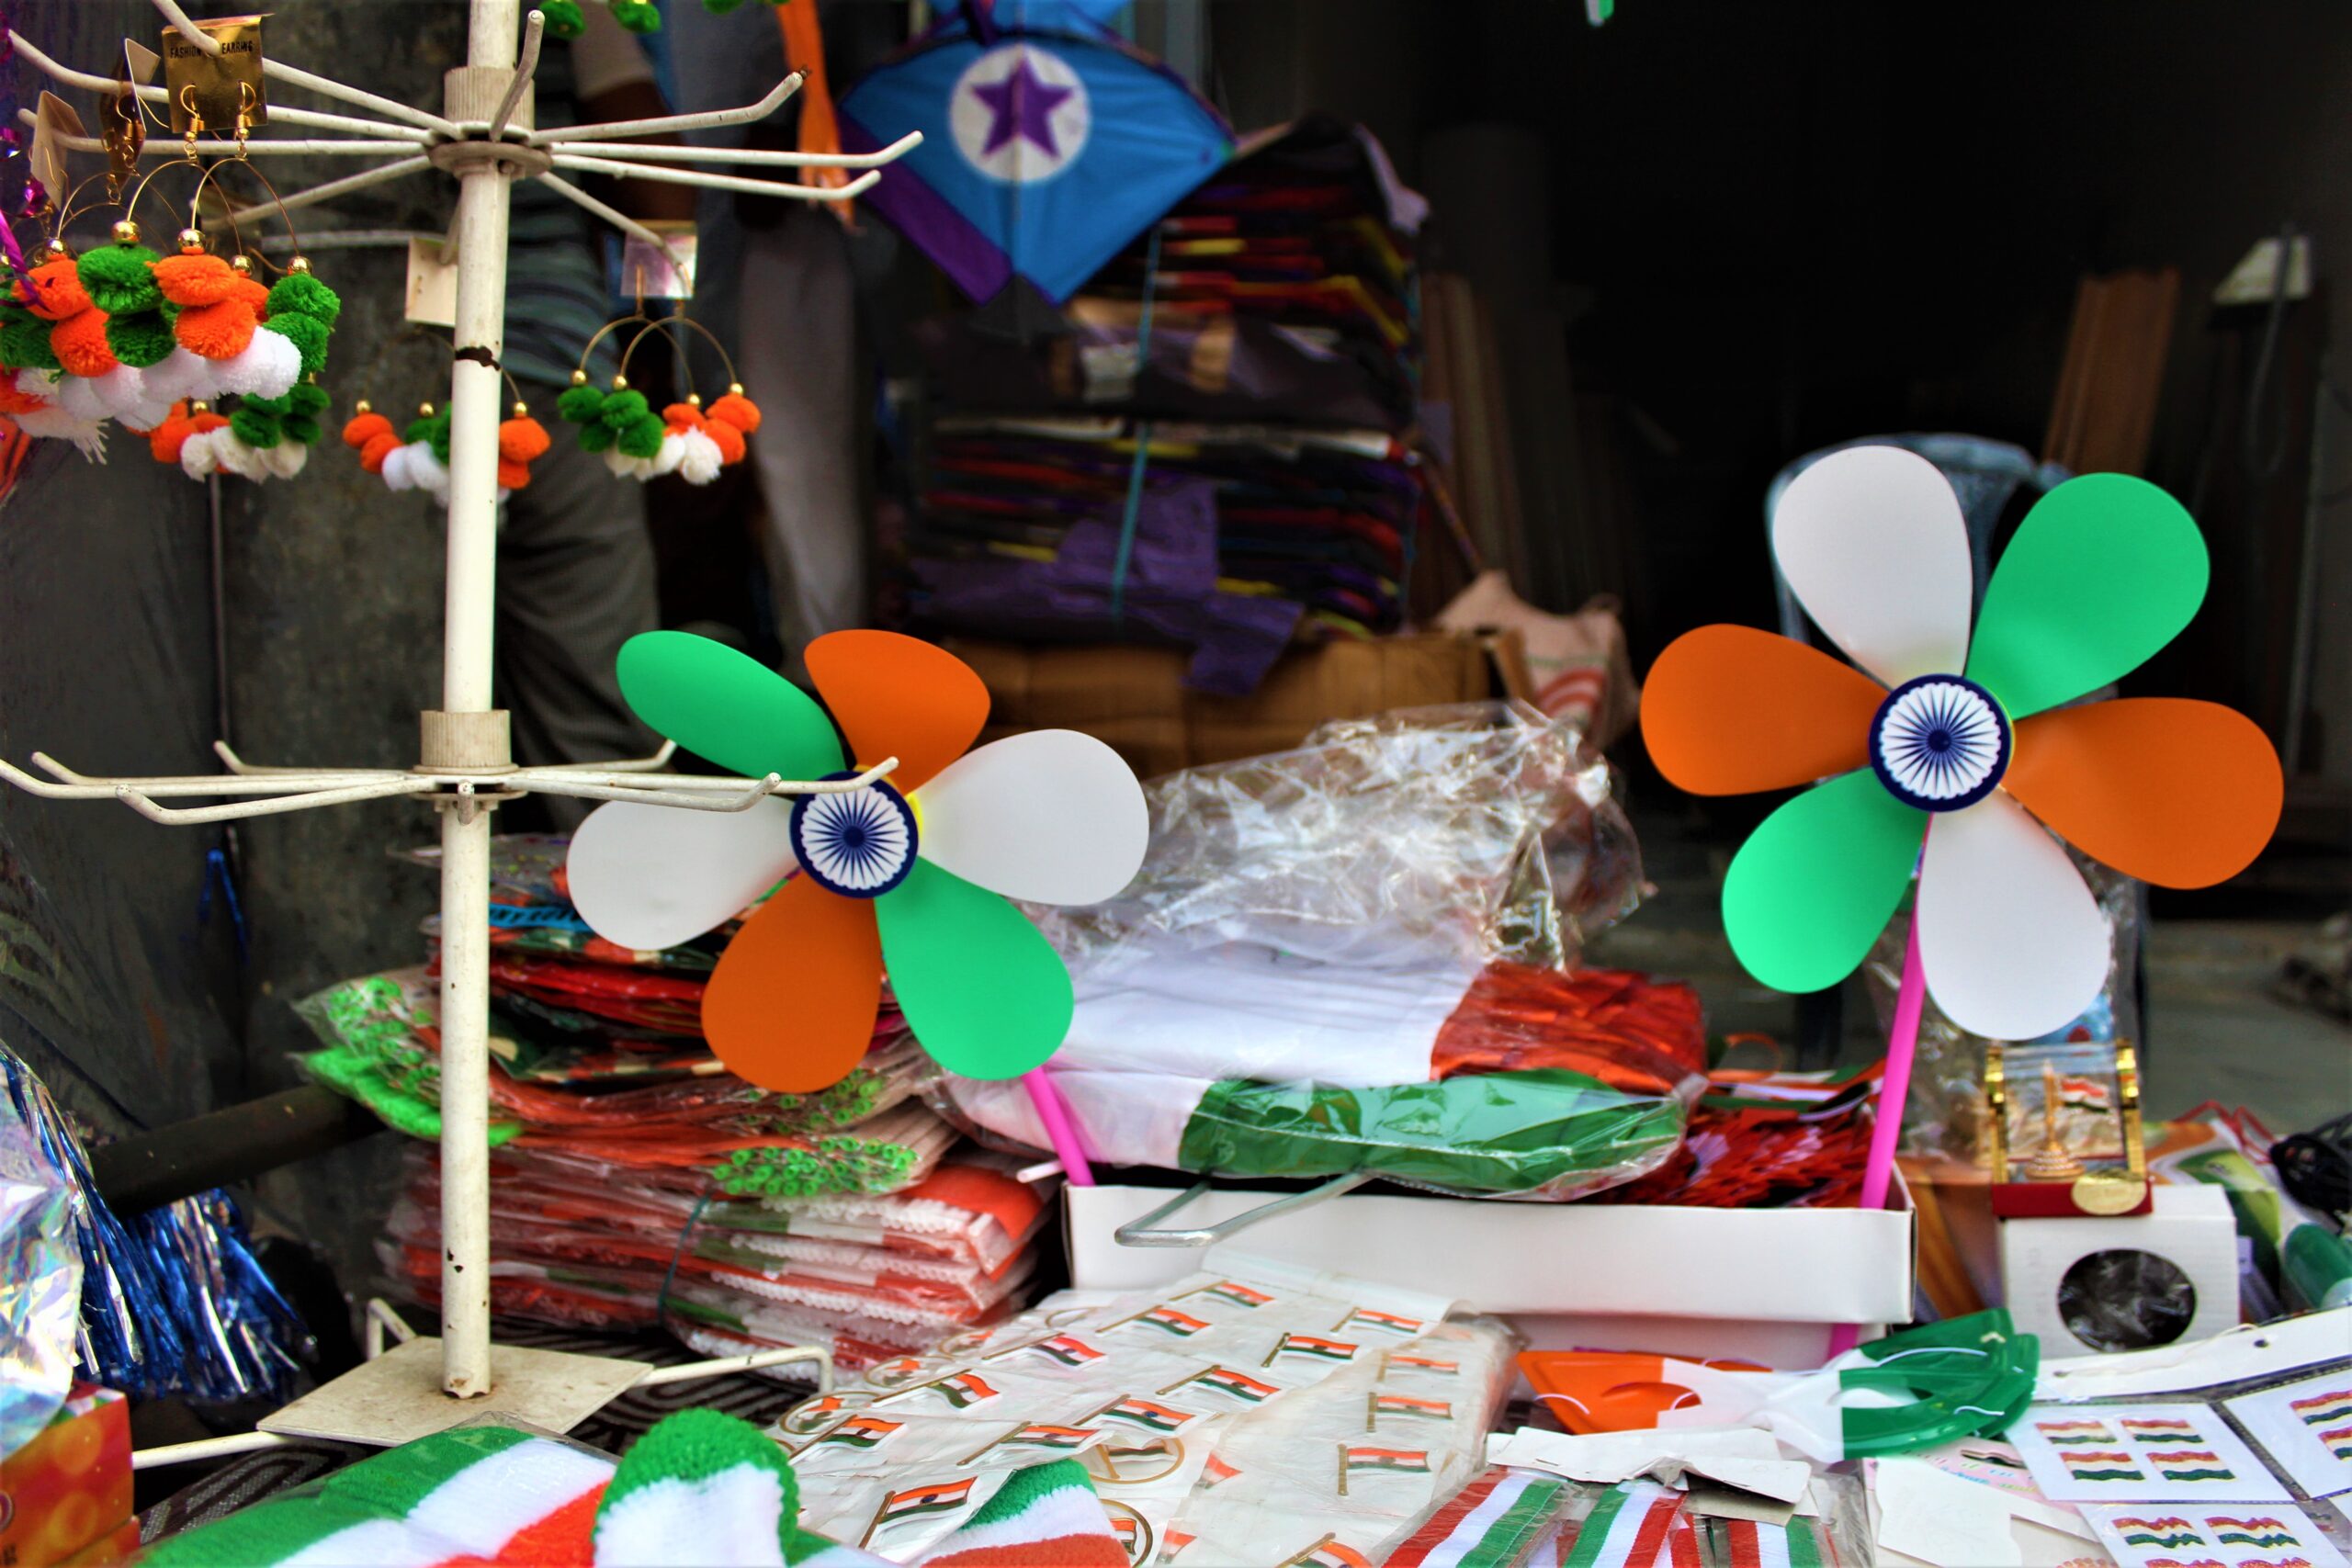 Ahead of I-Day, Patang Bazaar decks up in Tricolour